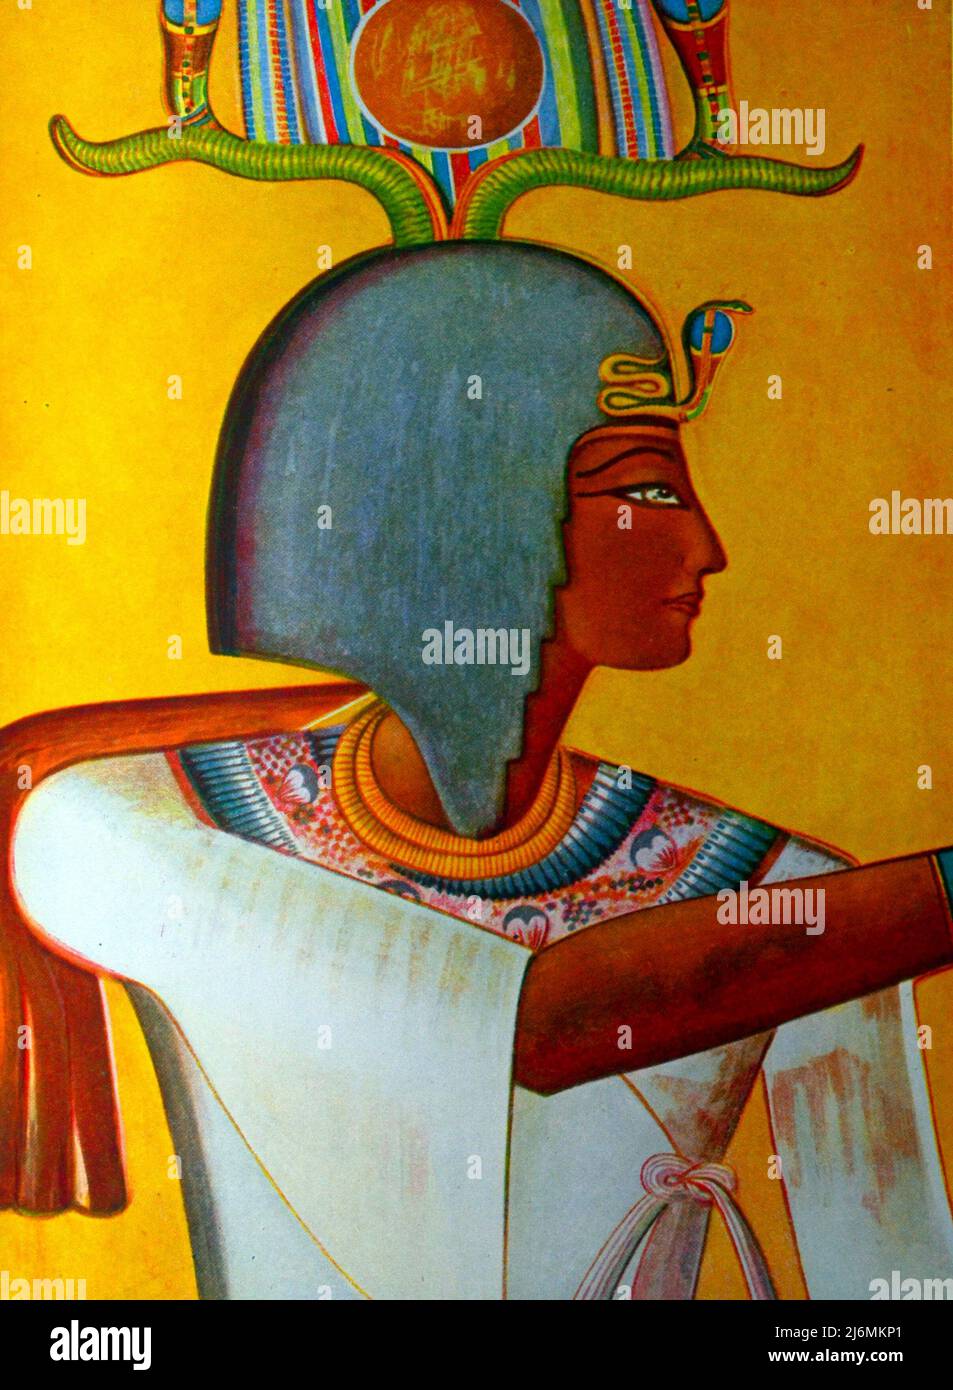 Antique or vintage or archival illustration or drawing of King Siptah of Egypt from the painted walls leading to the tombs of the valley of the kings. Siptah ruled Egypt for almost six years as a young man and died in 1191 BC, aged about 16 years. Stock Photo